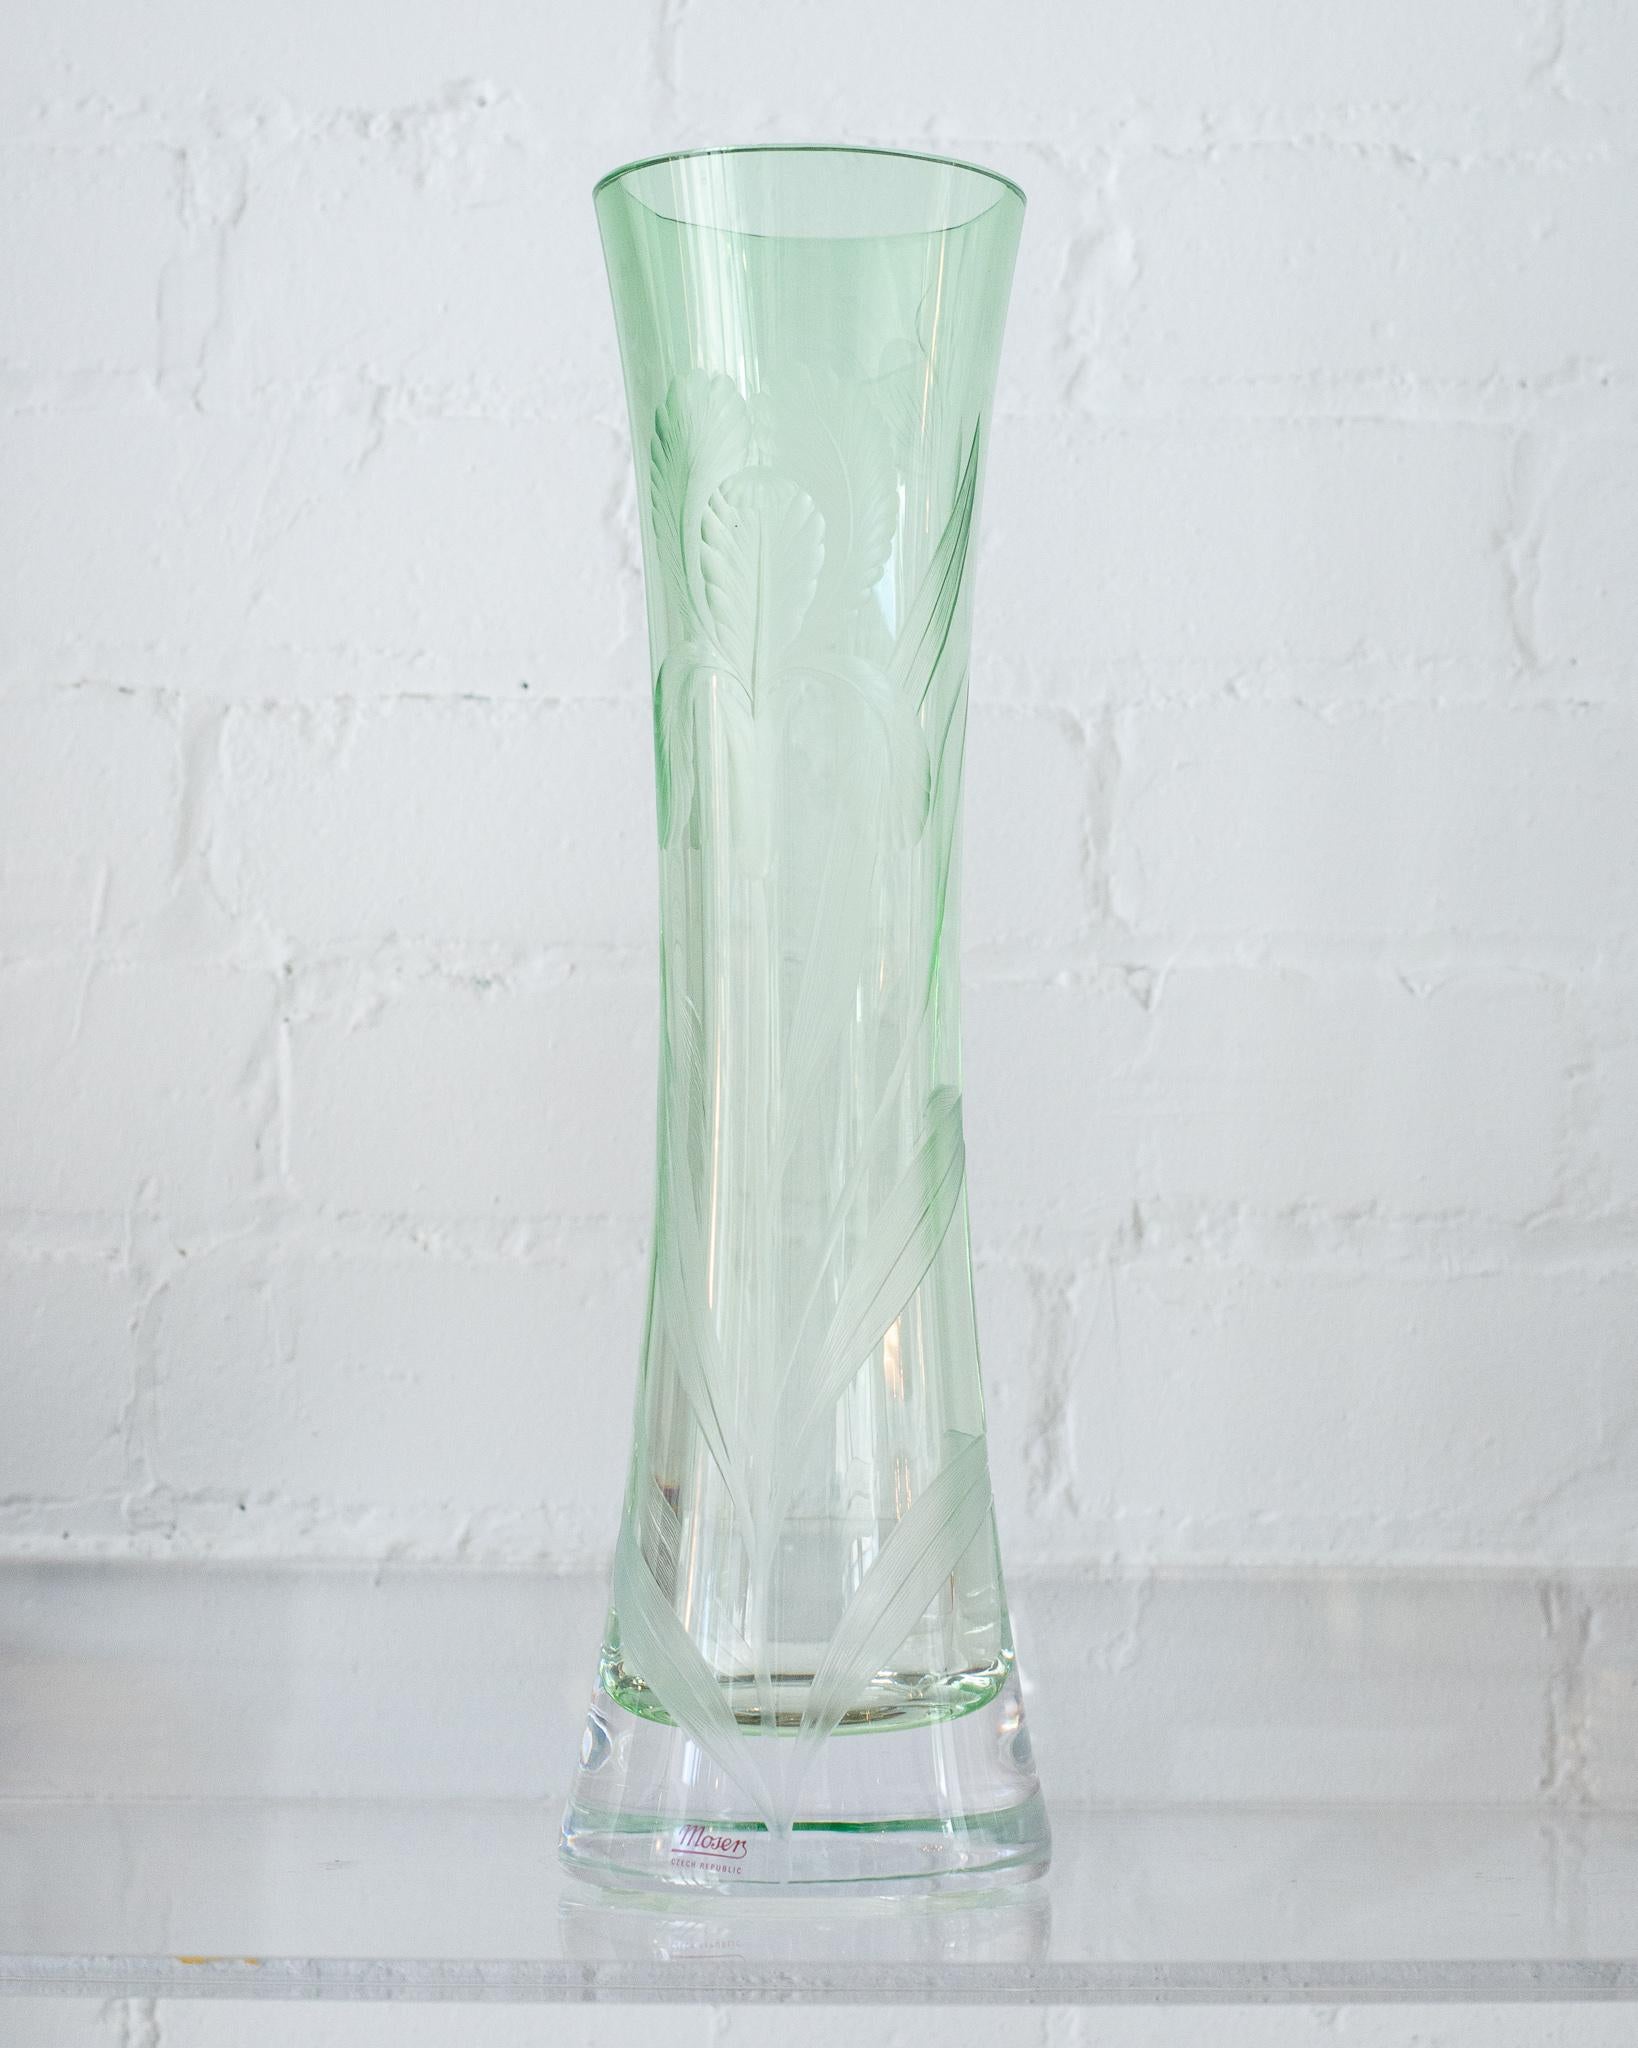 This contemporary green Moser Iris vase is hand blown, handcut, and is the perfect size to hold flowers. A single stem of cymbidium orchids is all it needs. Even empty, it is a stunning accessory with it's soft gradient from clear to green. Signed